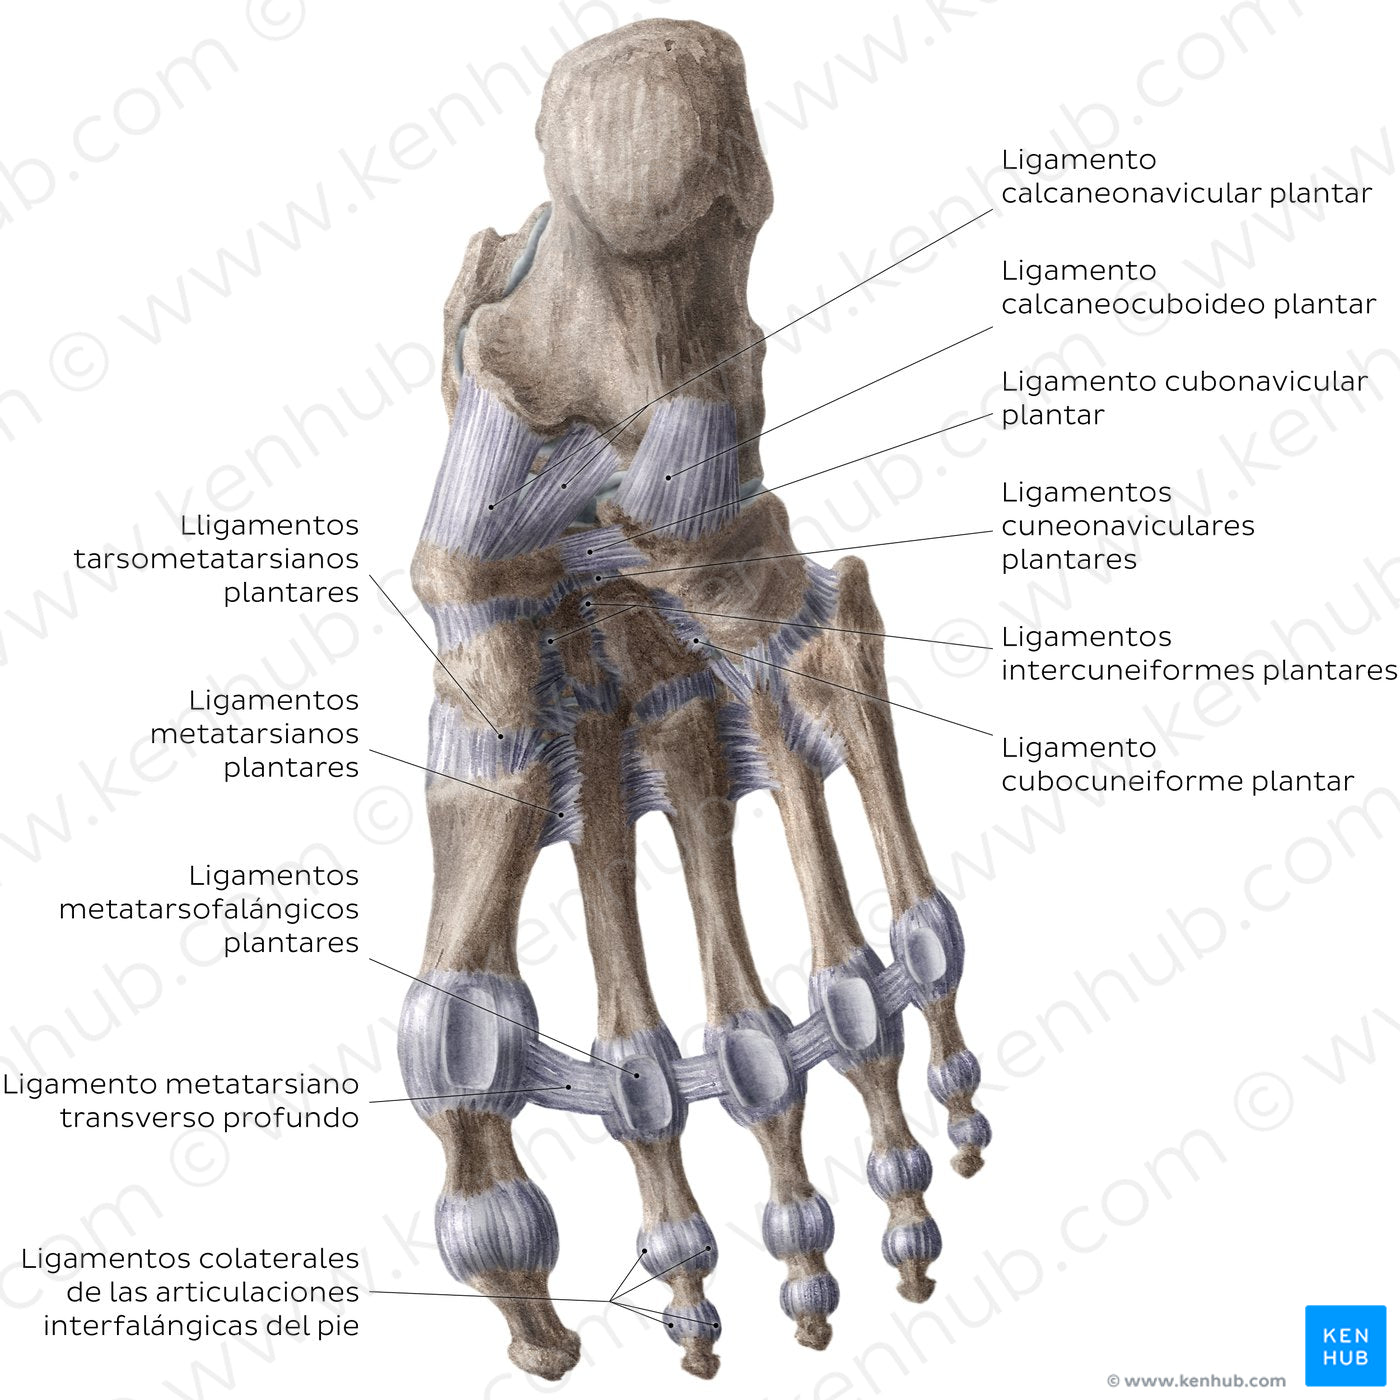 Ligaments of the foot (plantar view) (Spanish)